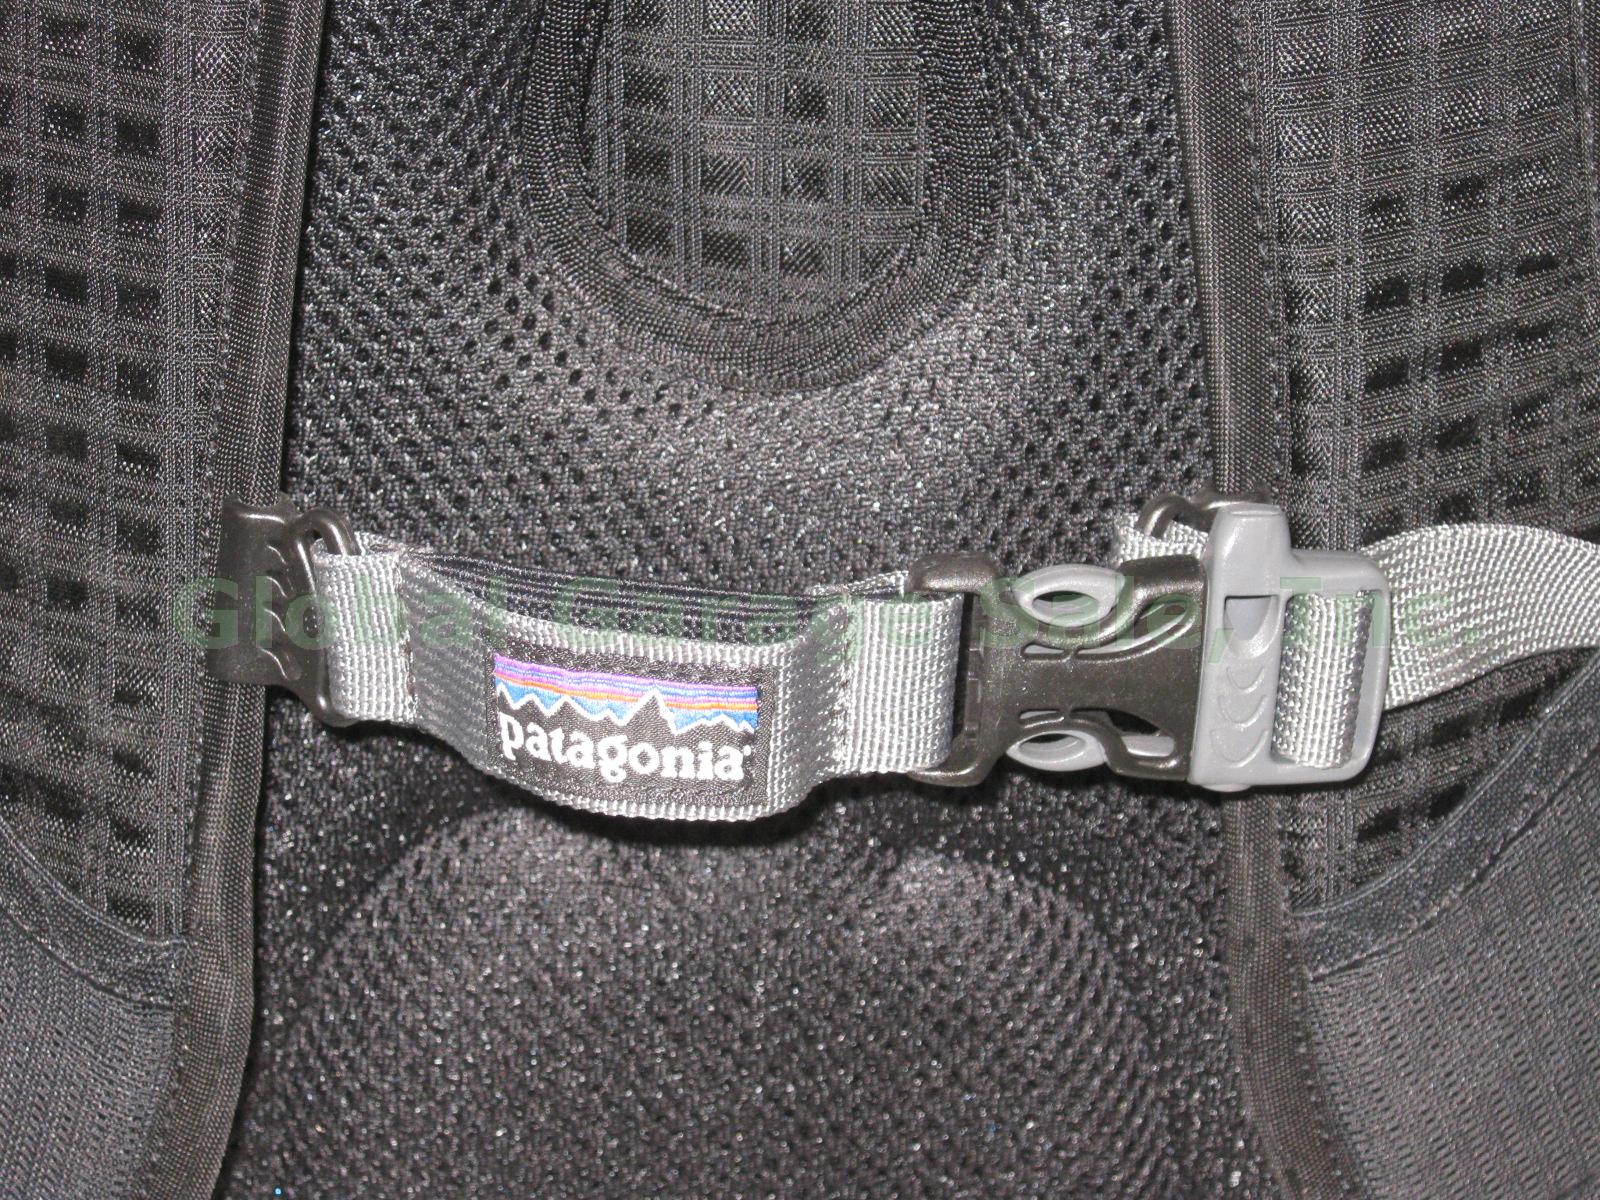 NWT Patagonia ALL Lightwire Backpack Laptop Computer Book School Bag Day Pack NR 5